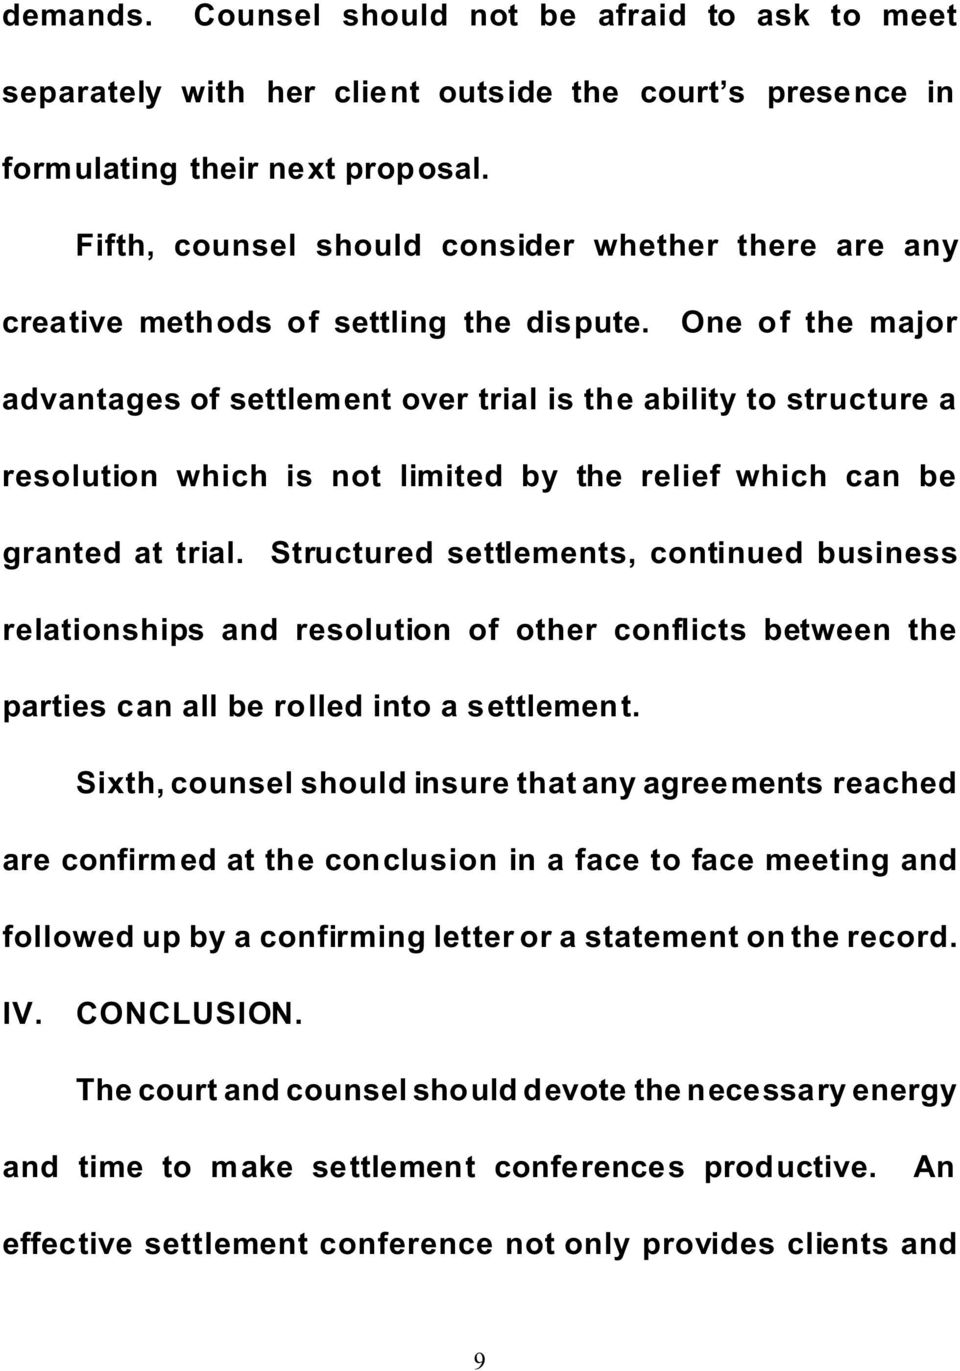 One of the major advantages of settlement over trial is the ability to structure a resolution which is not limited by the relief which can be granted at trial.